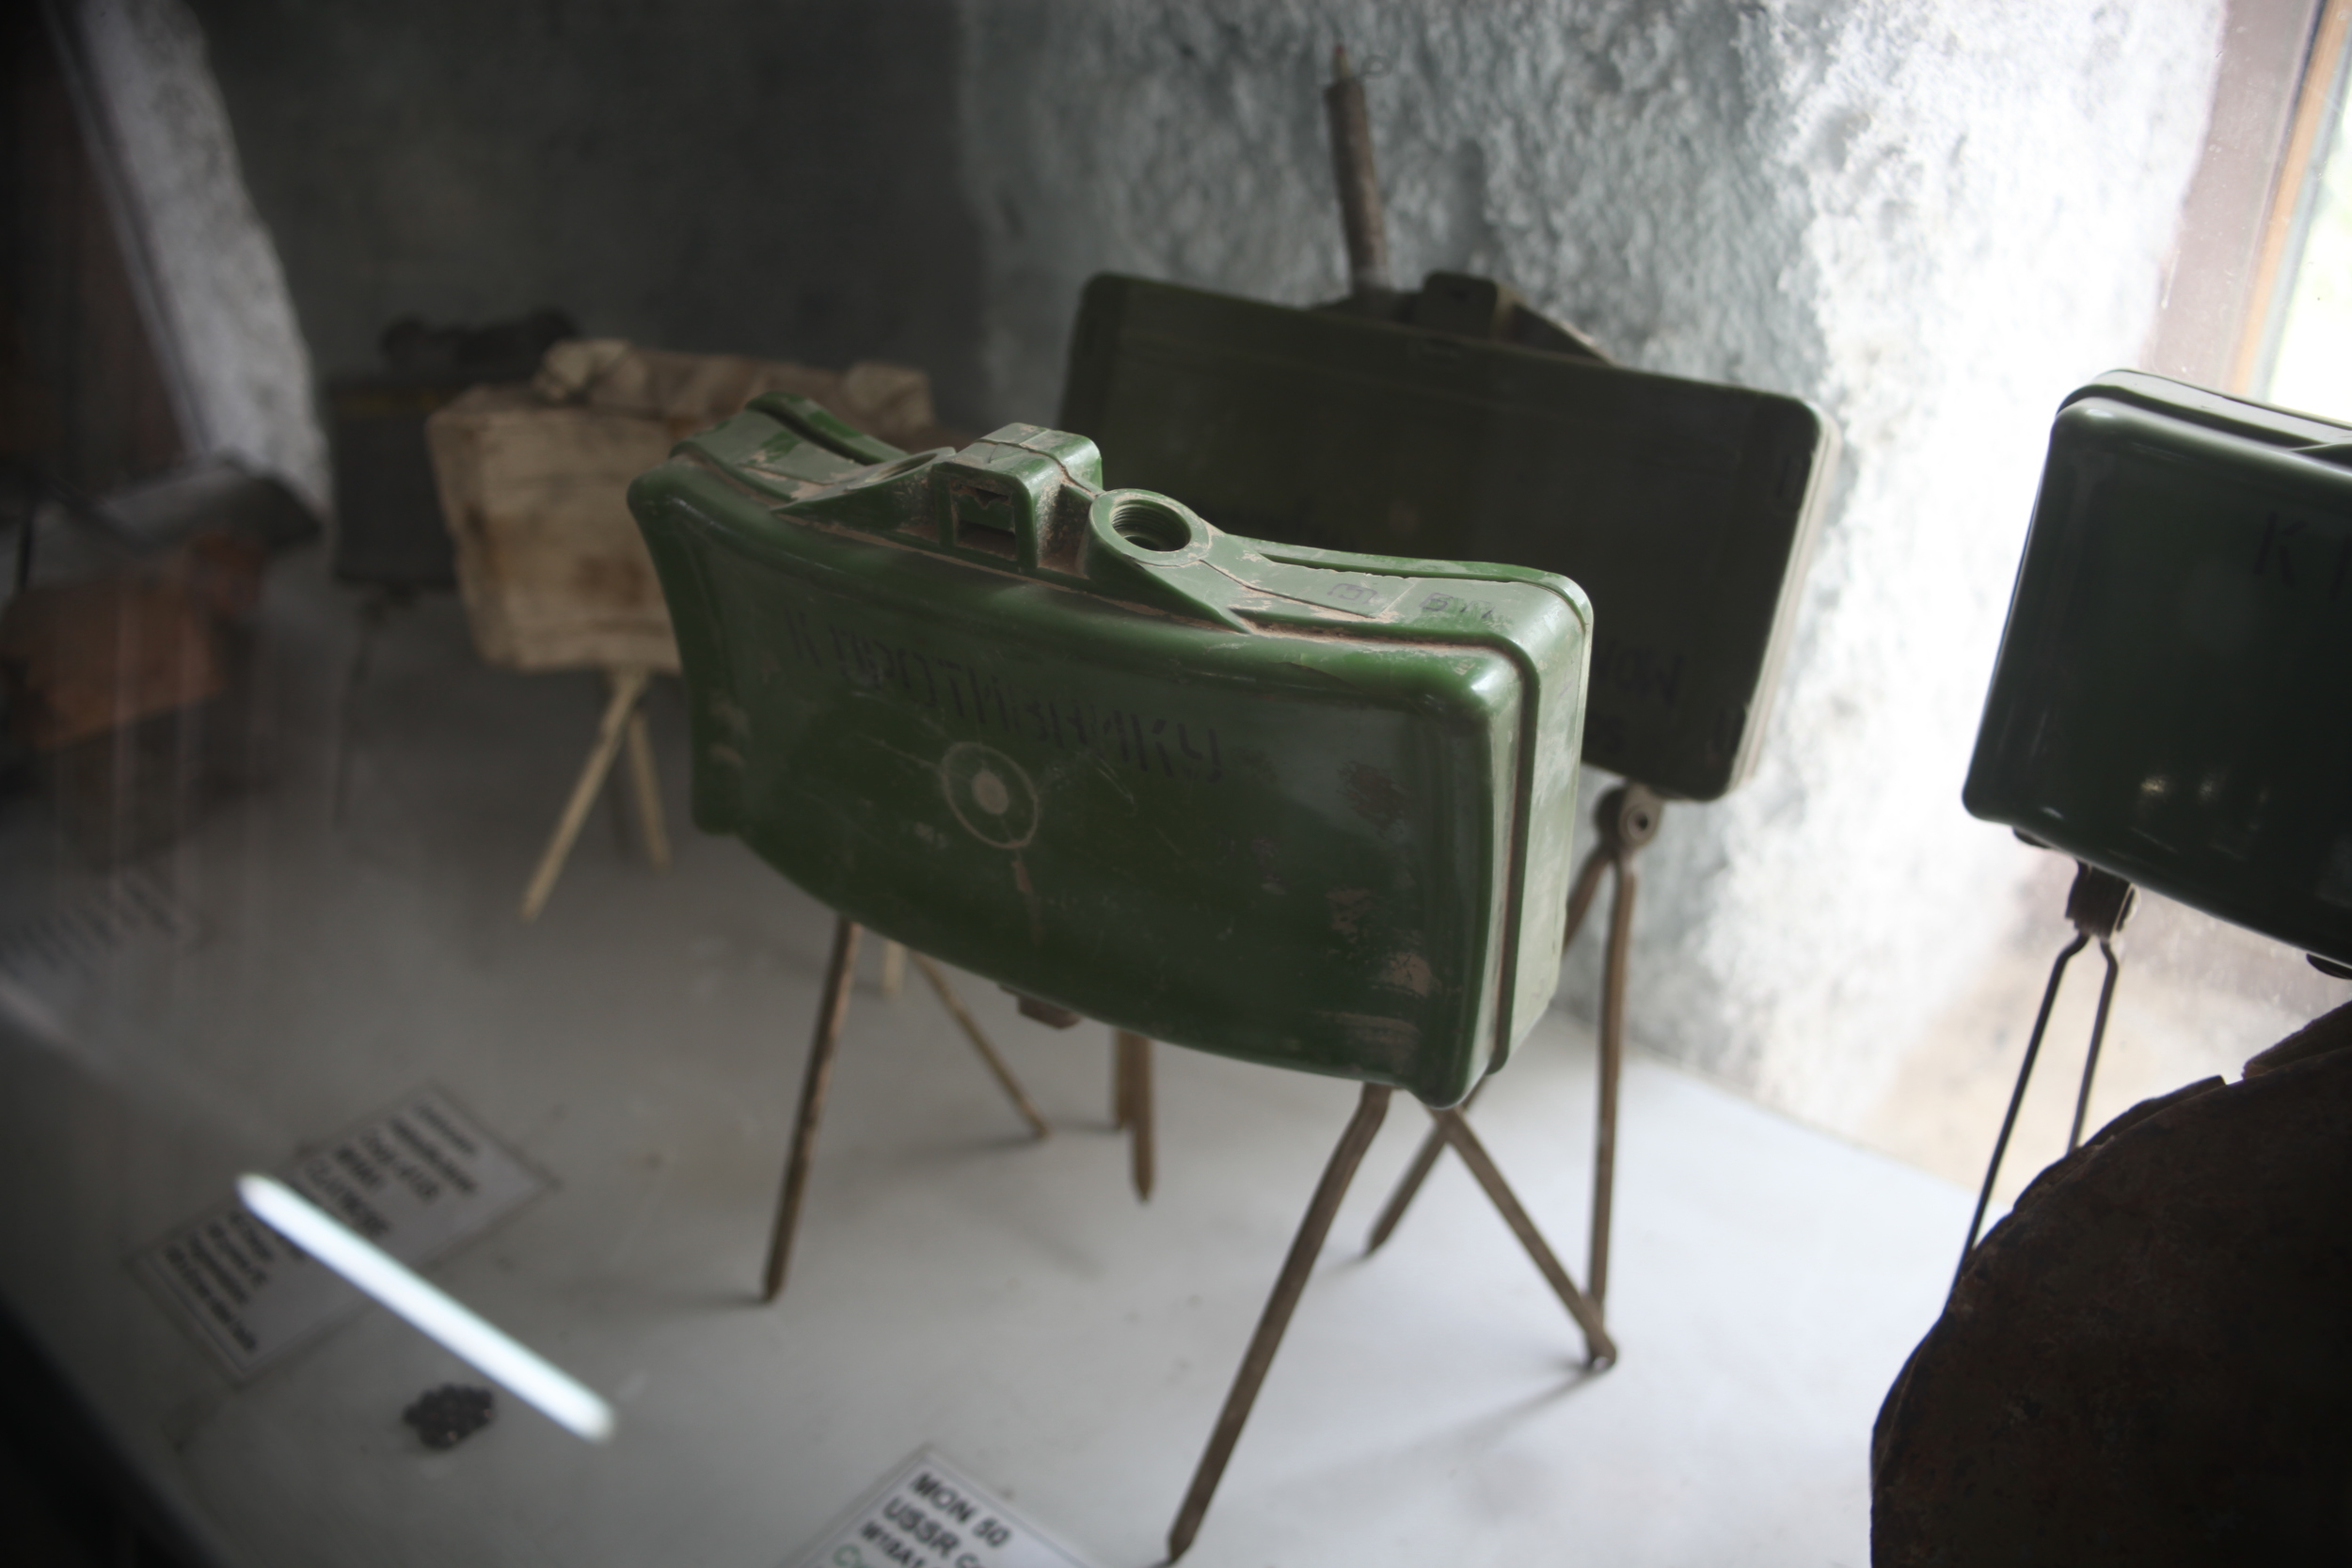   The Omar Mine Museum houses hundreds of unearthed and disarmed land mines ranging from those designed and deployed by the Americans to improvised explosive devices made from ordinary household materials such as urns, flashlights, and other innocuou